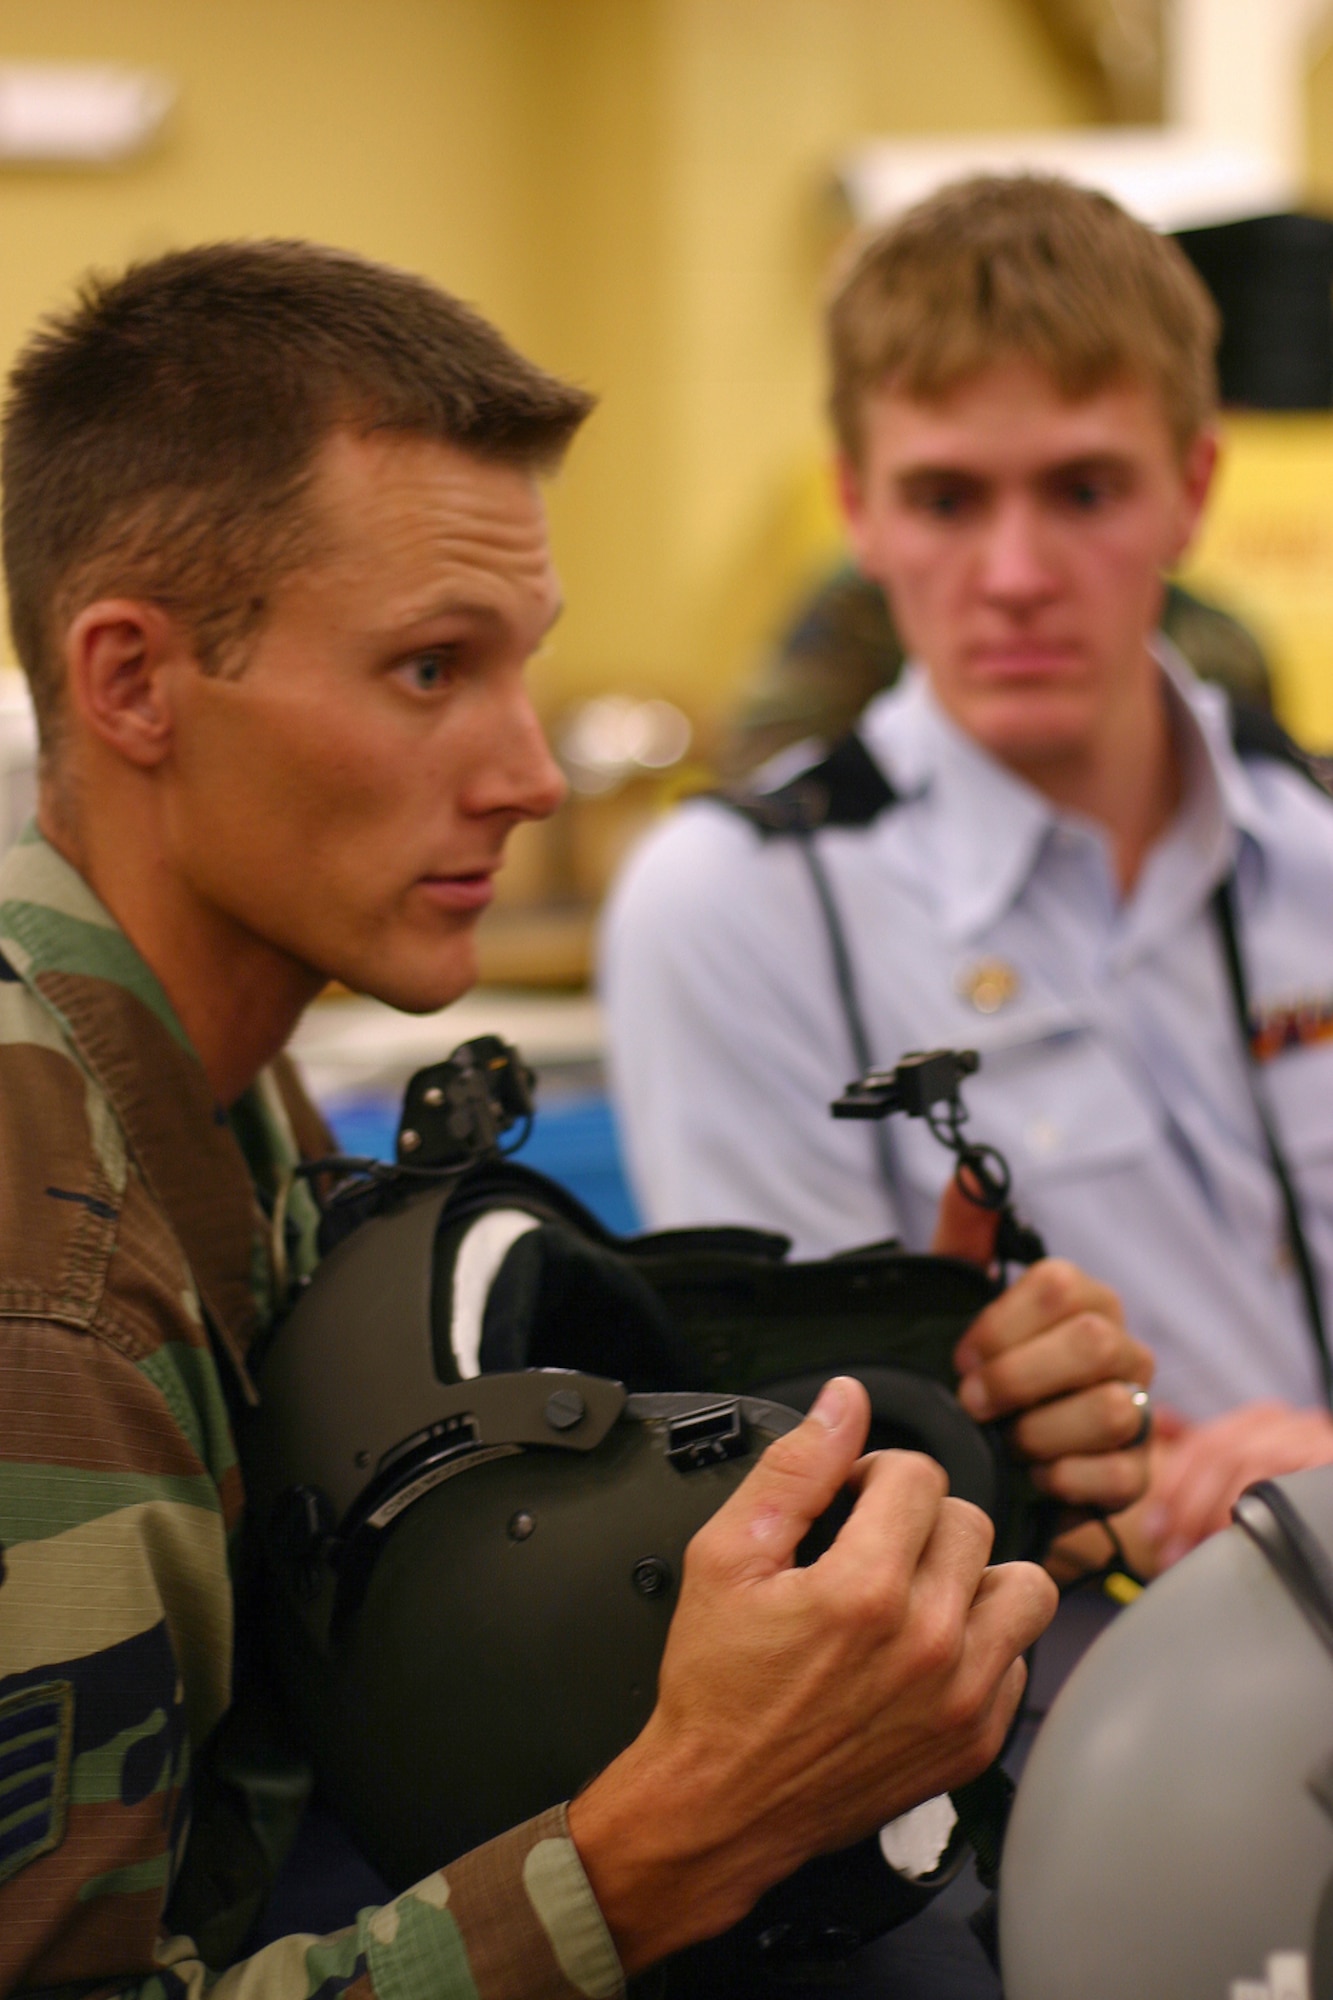 Staff Sgt. Robert Arnold talks with Junior ROTC Cadet Kyle Sanders and others about equipment used by helicopter pilots at the 58th Special Operations Wing at Kirtland Air Force Base, N.M.  More than 50 high school students from 20 states nationwide visited the squadron as part of the Air Force Junior ROTC Aerospace and Technology Honor Camps. (U.S. Air Force photo/Staff Sgt. Jason Lake)